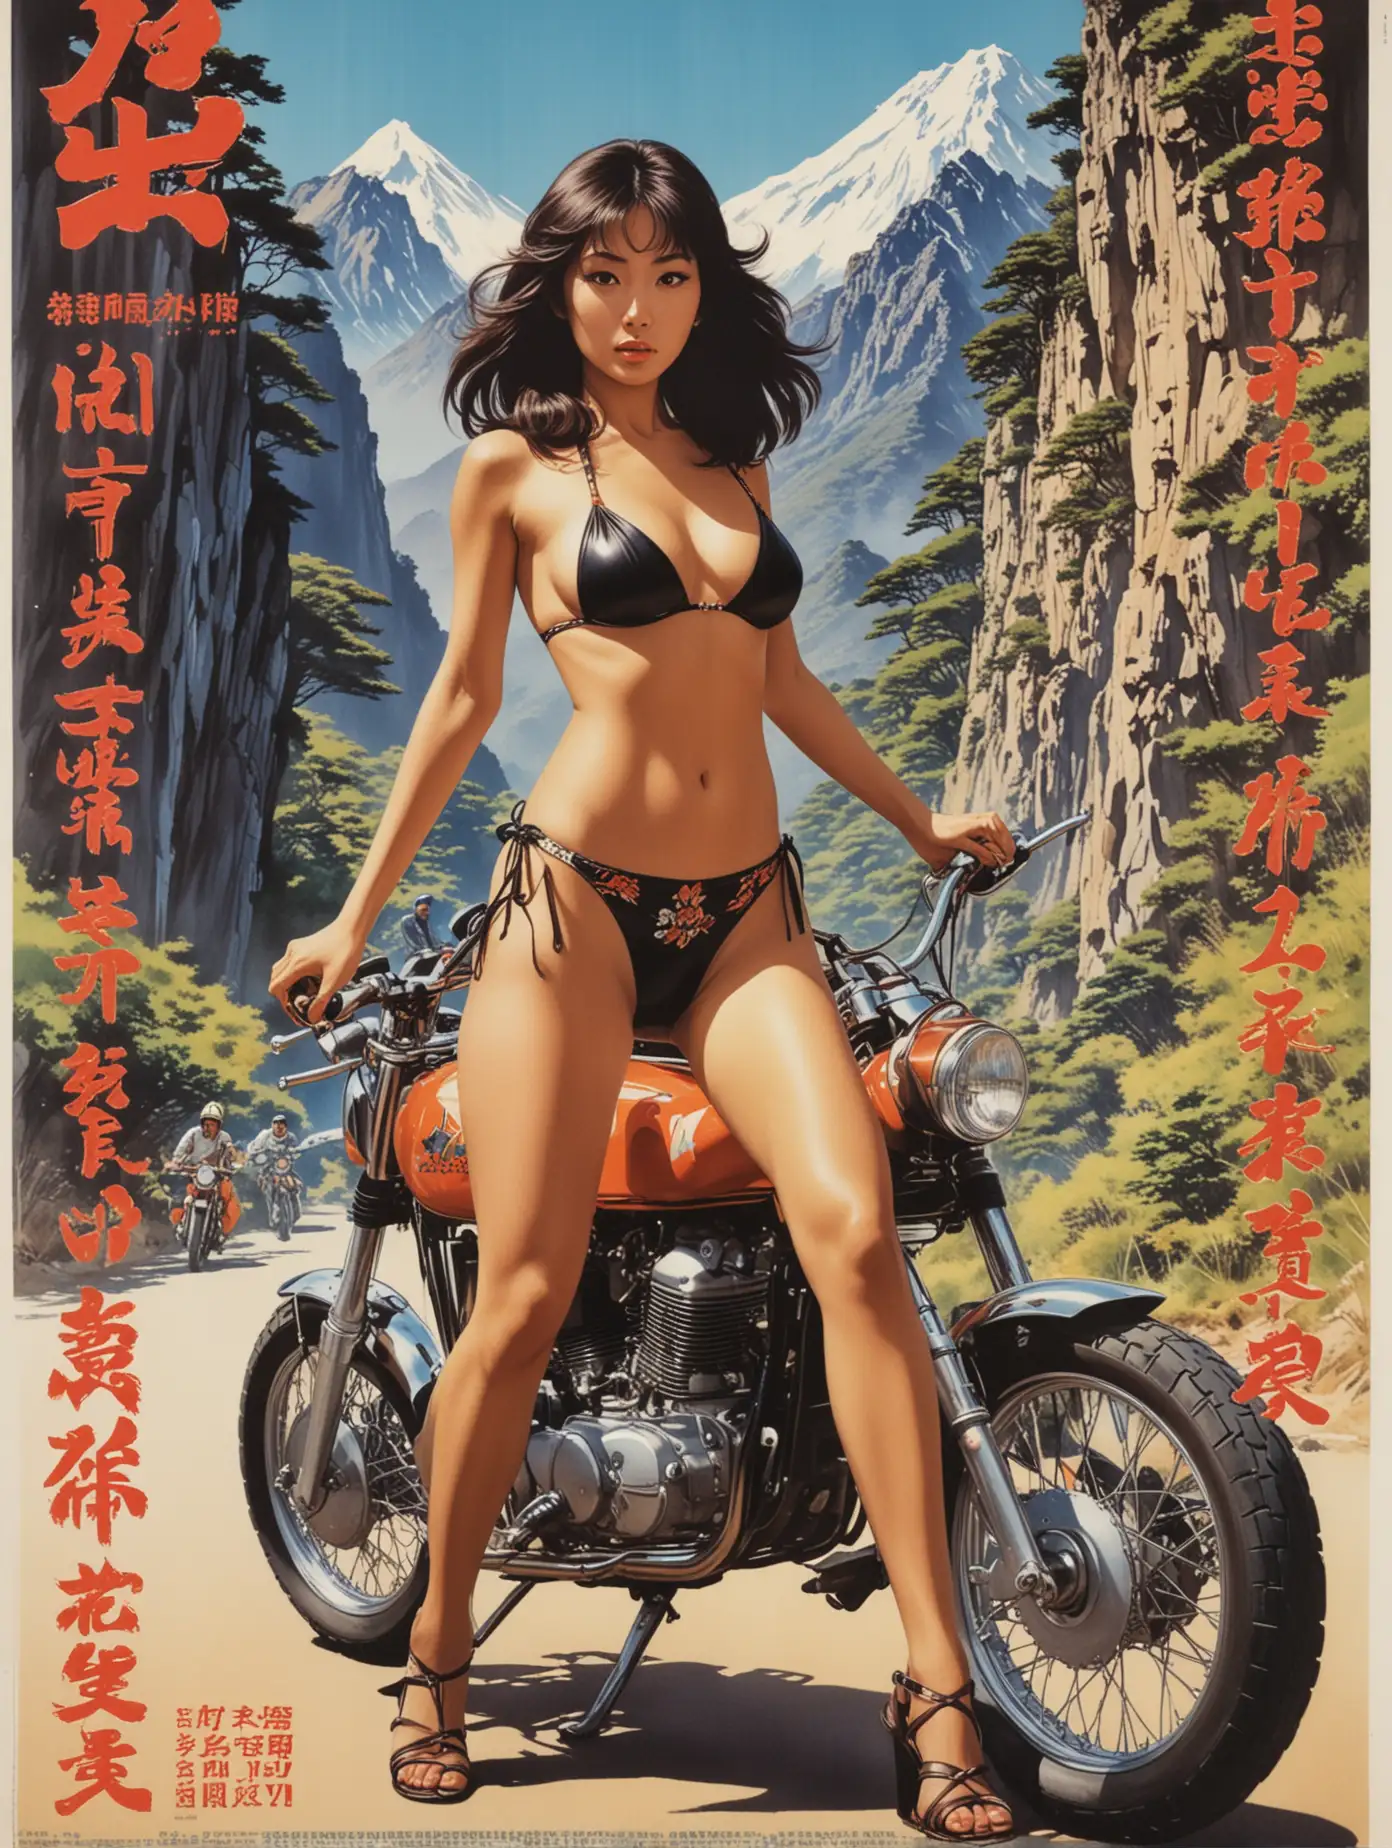 gaudy film poster combining a two or three various actions and characters in a somewhat composite design, for a 1970s Japanese exploitation film, with sensual oriental bikini girl riding a motorbike on a mountain canyon road, sensual gaudy girl gang film, with bold text and company markings in poster style